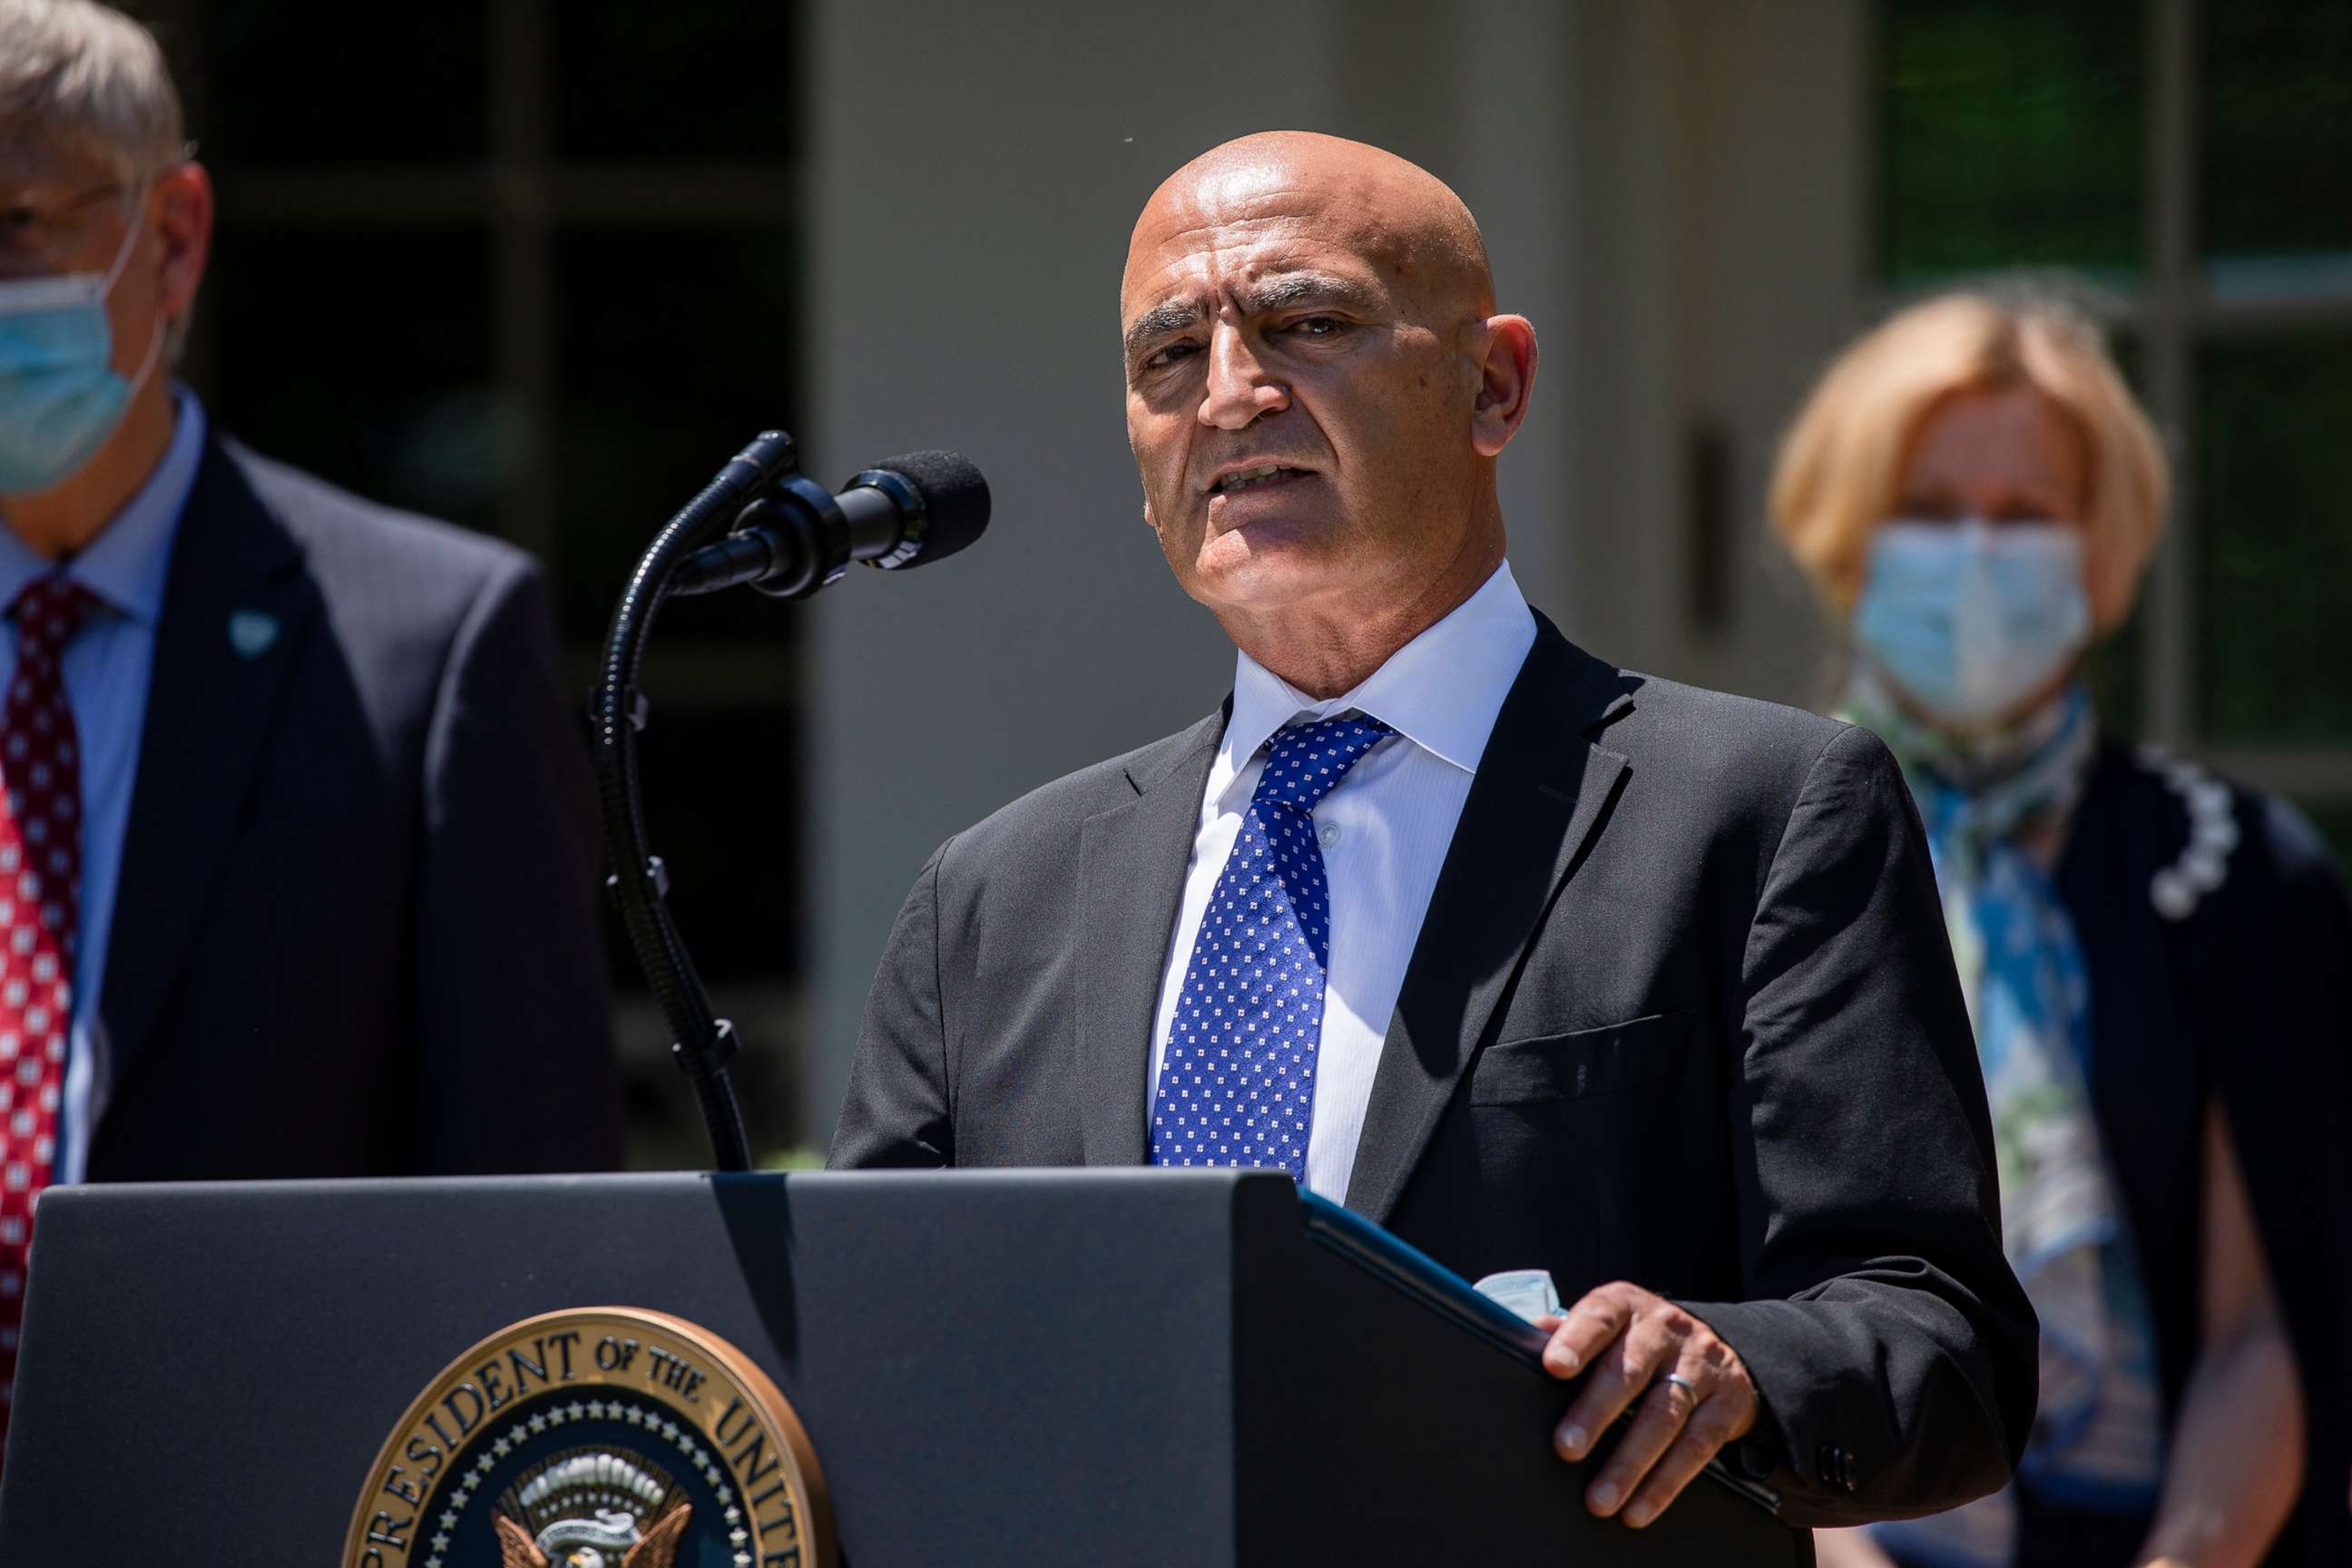 PHOTO: Moncef Slaoui, a former pharmaceutical executive, speaks after President Donald Trump announced his appointment to lead the development of a vaccine for COVID-19, at the White House in Washington, May 15, 2020.